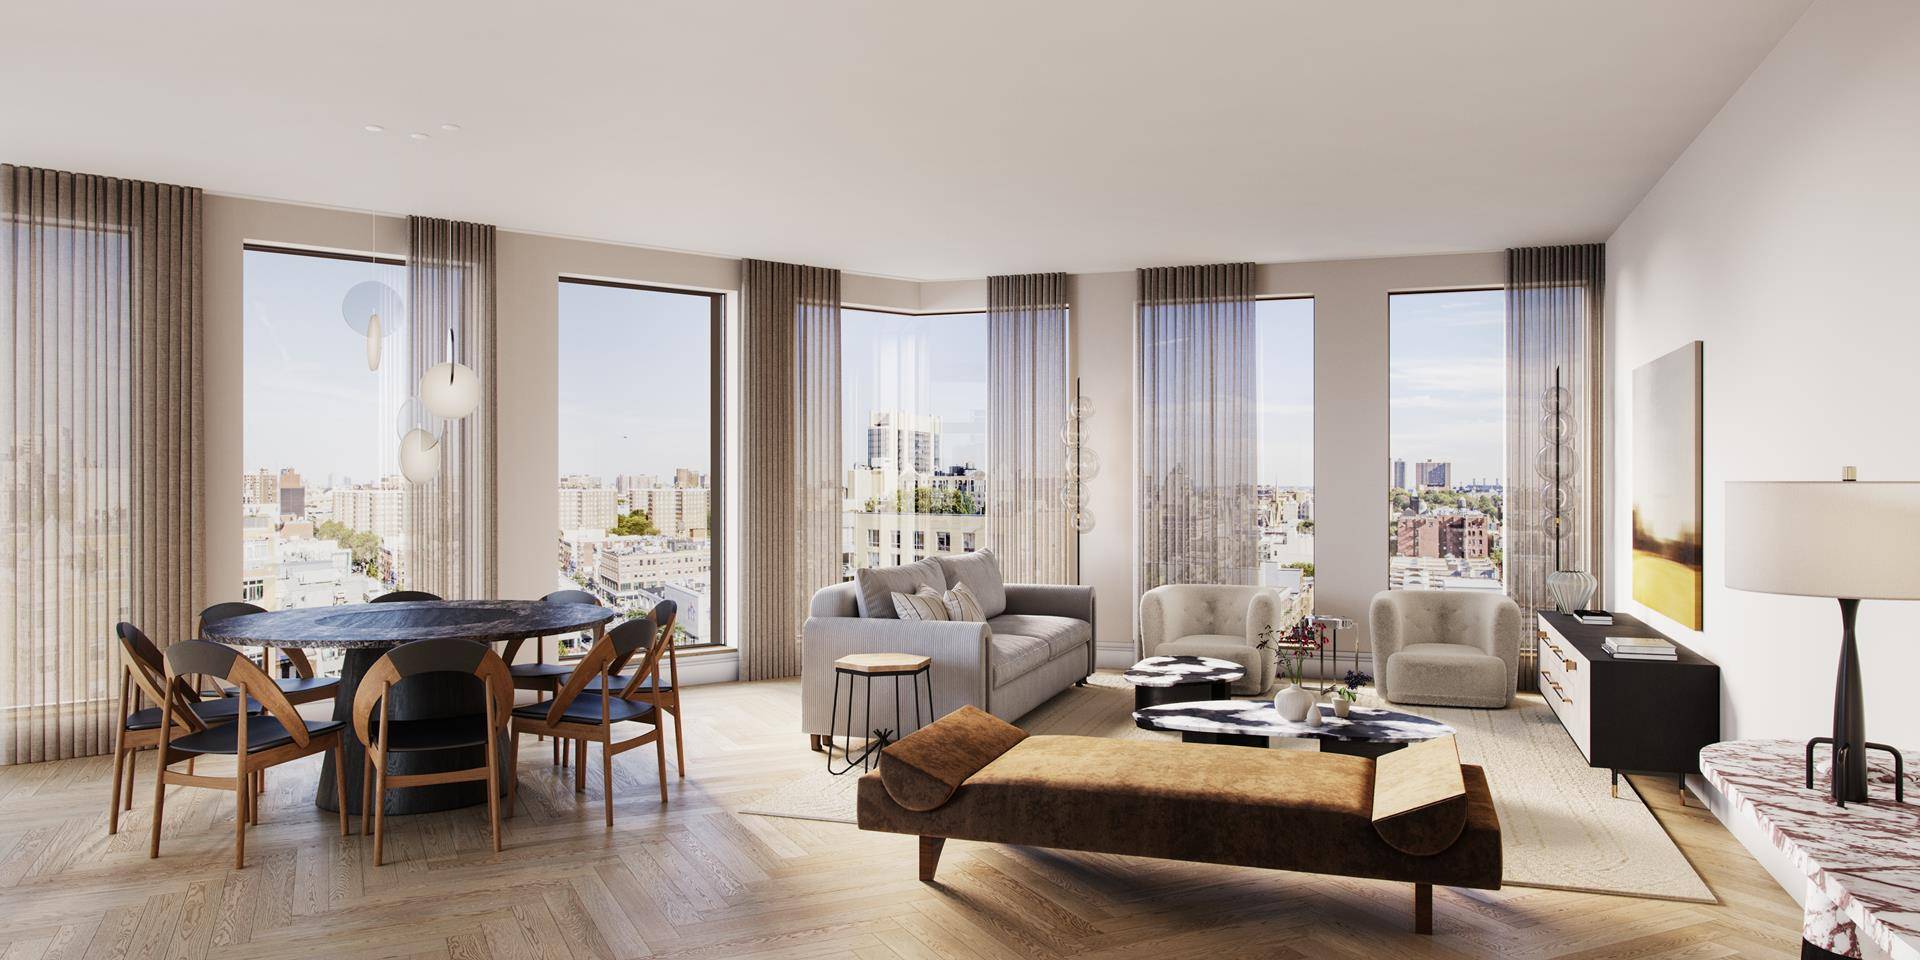 Sales Gallery Now Open By Appointment Introducing residence 8A at 300 West, a 1, 200 square foot eastern facing two bedroom, two bathroom, offering an enormous living and dining area ...